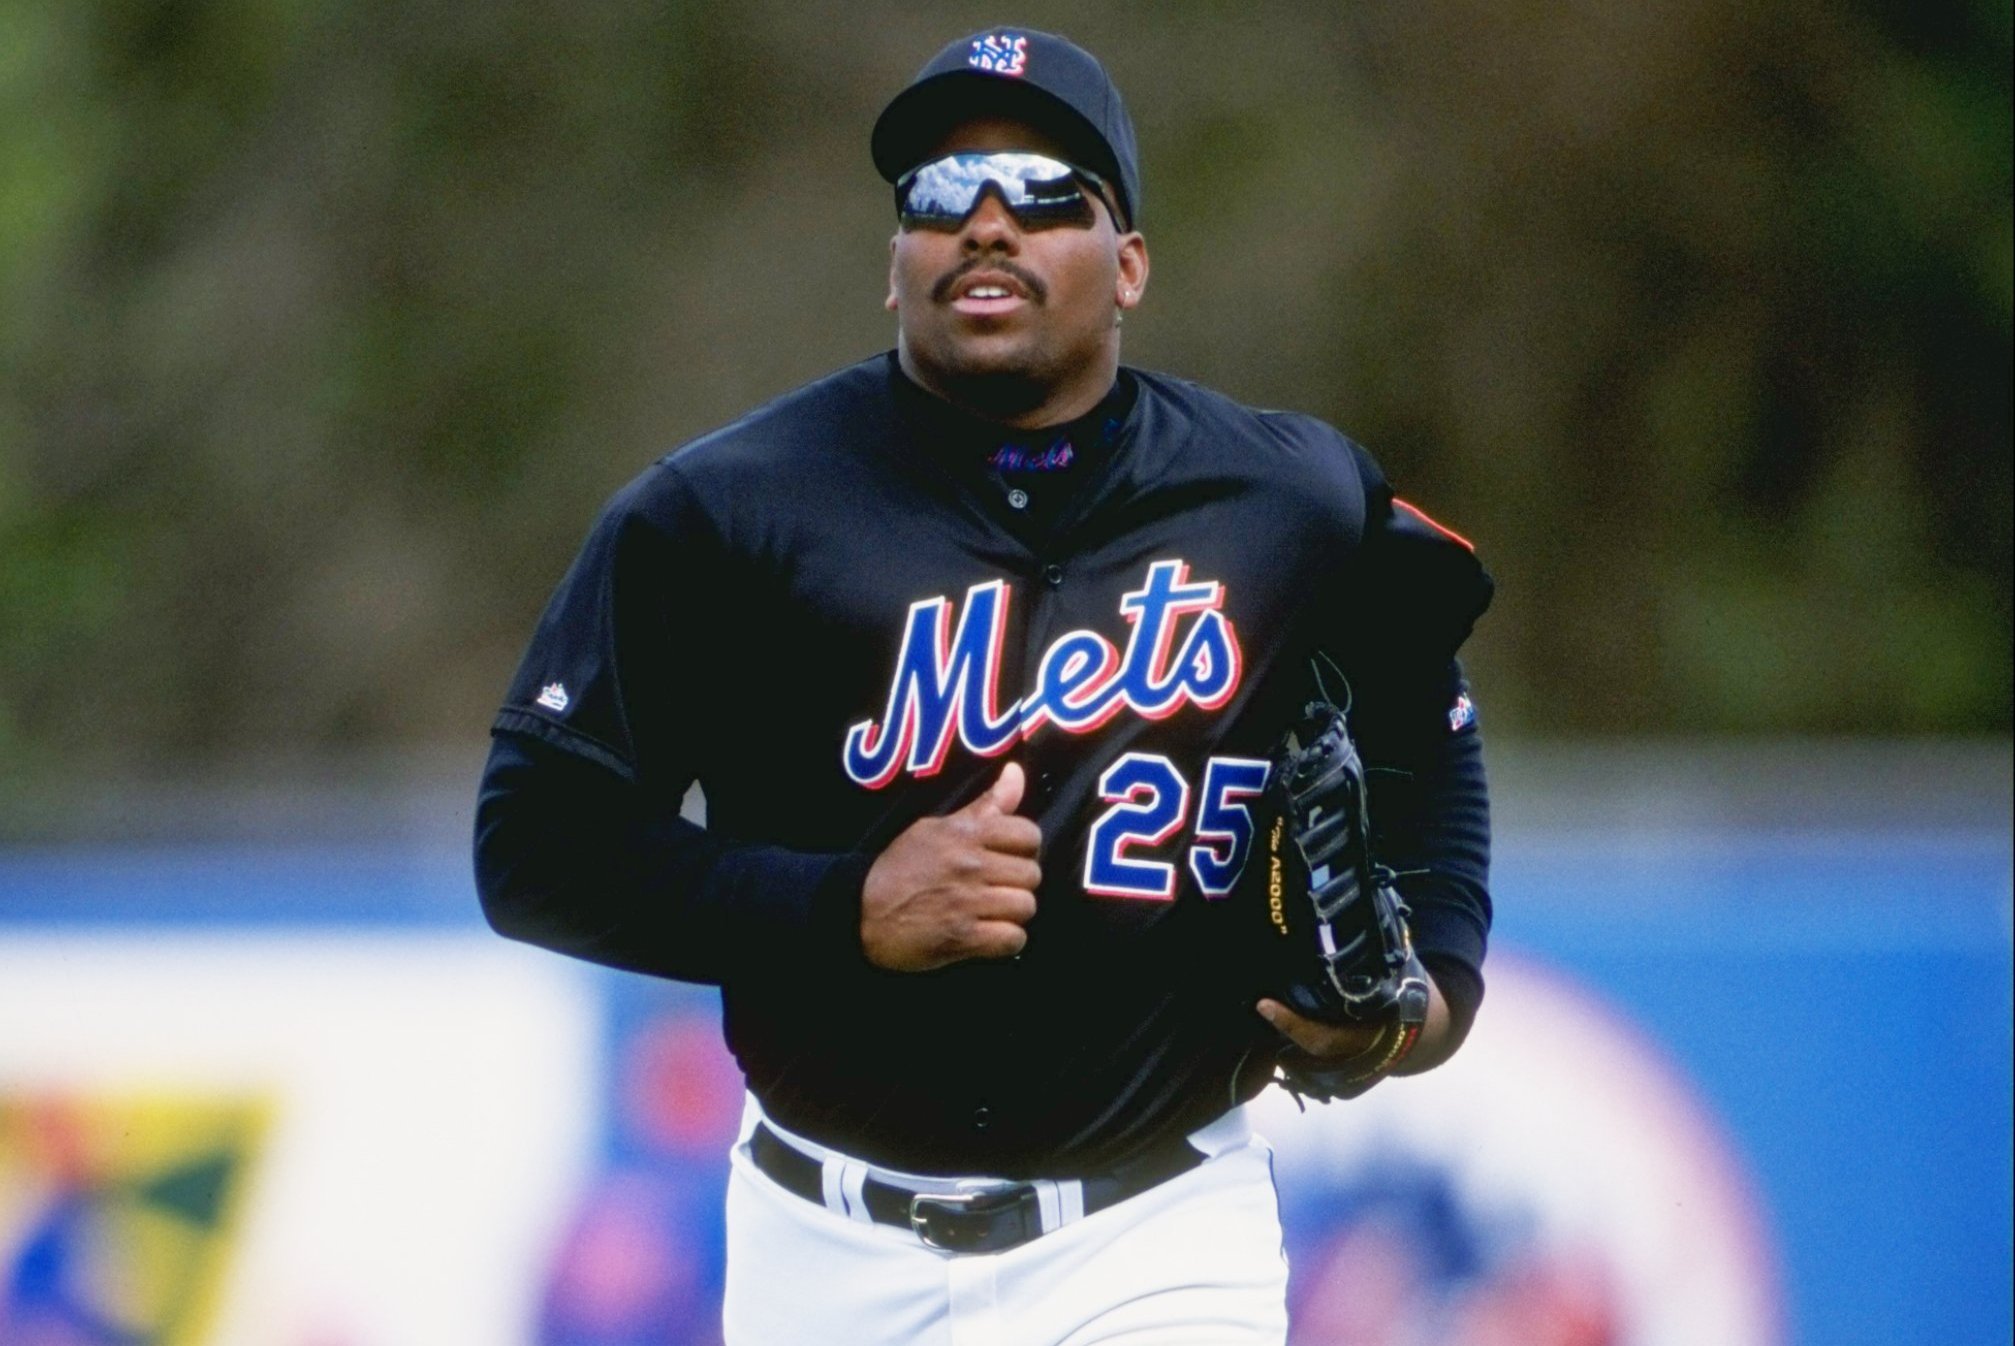 Here's why Bobby Bonilla collects a $1.19 million paycheck from the New  York Mets on July 1 - ABC7 New York